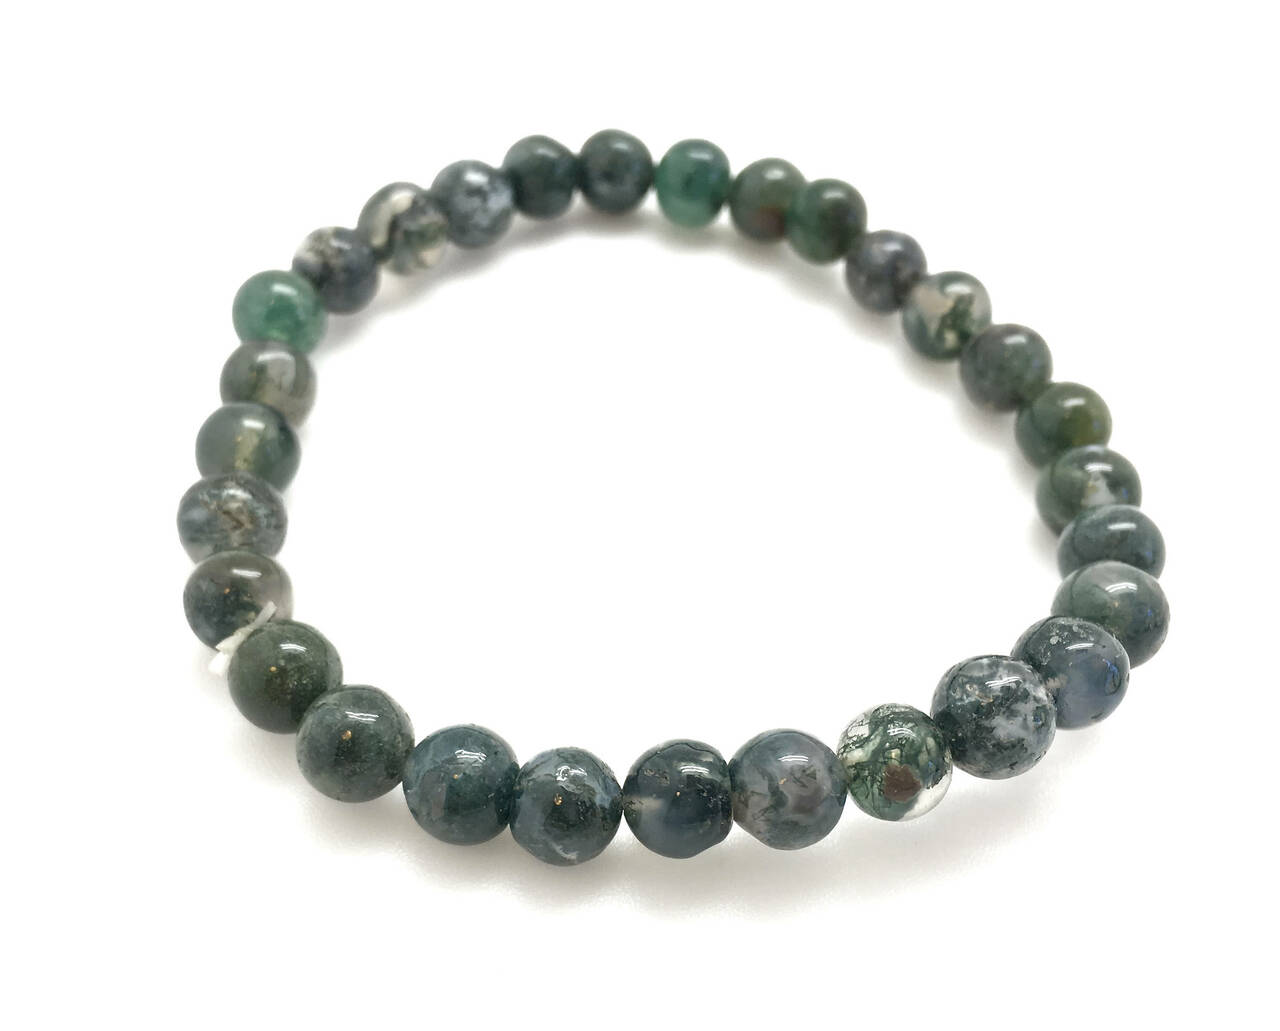 Details about   8mm Tree Moss Agate 108 Beads Handmade Tassel Necklace Wristband Classic Chakra 